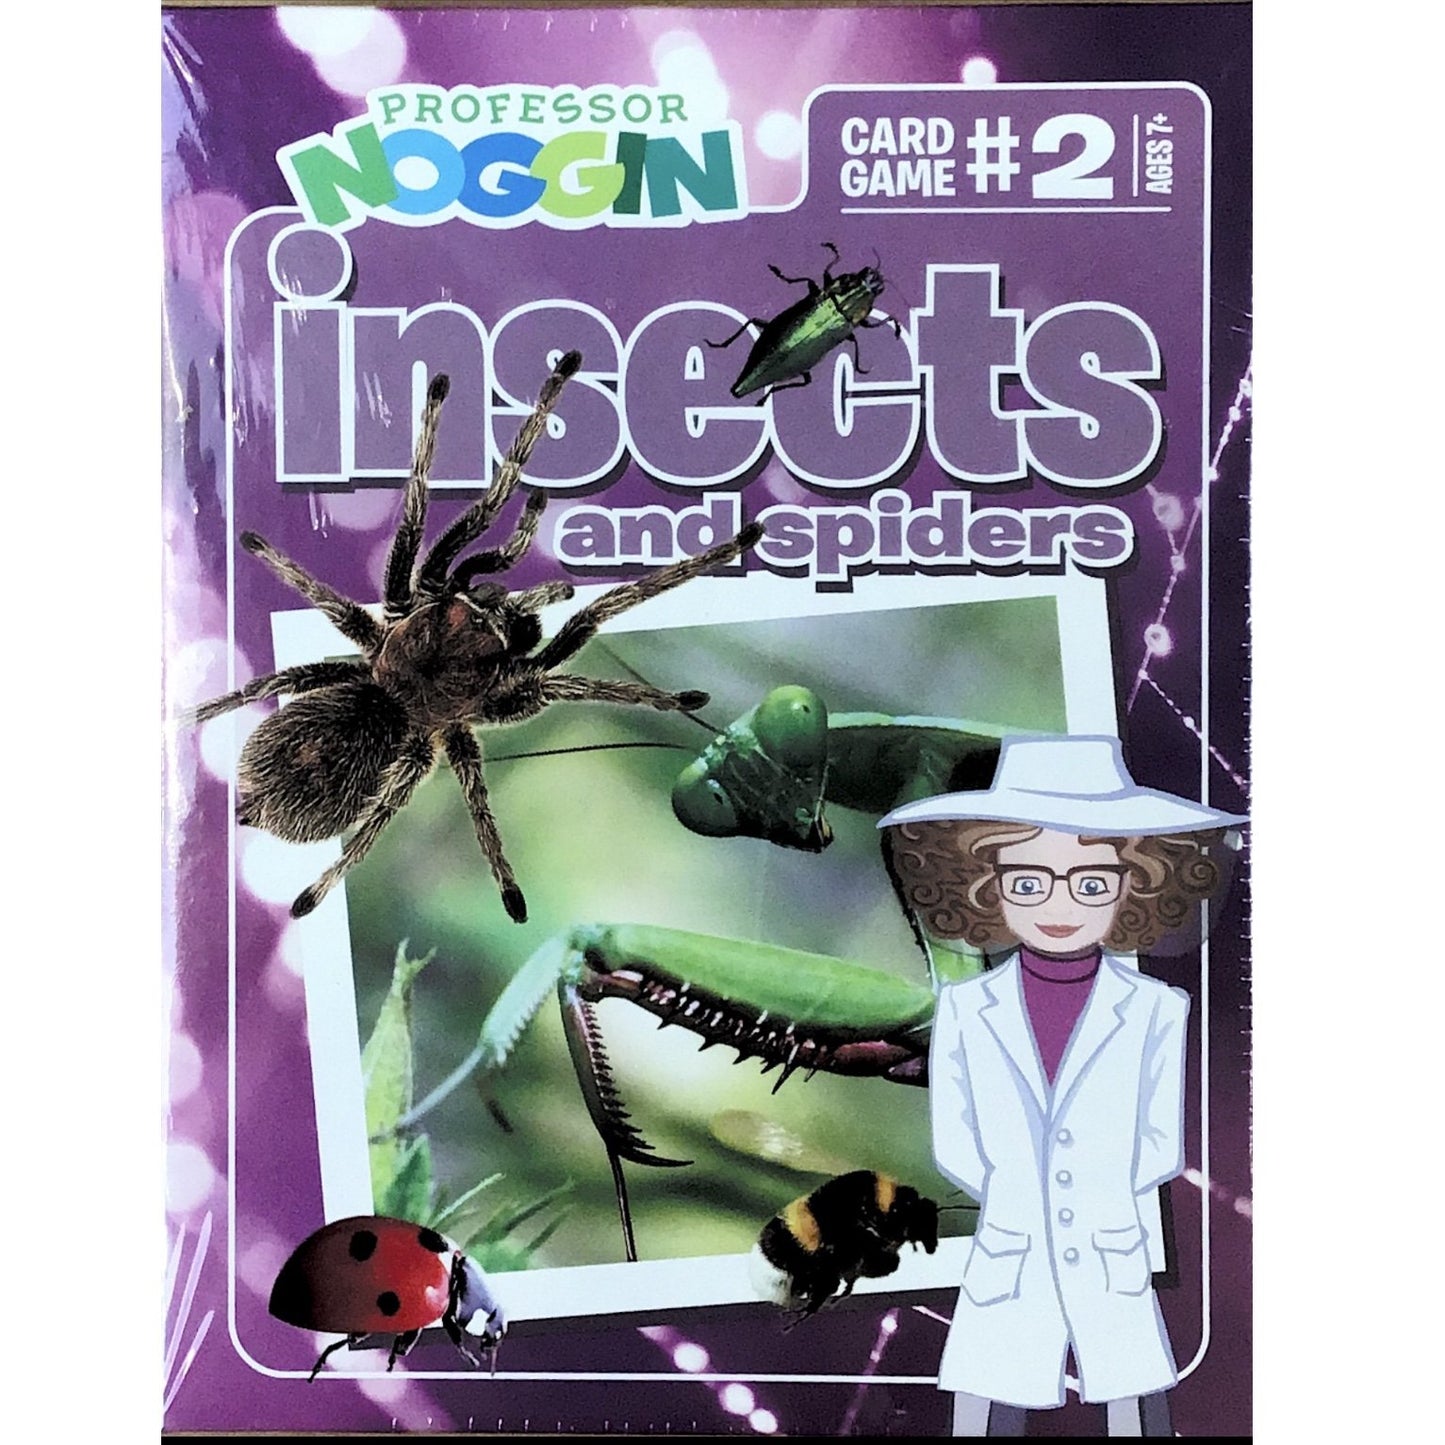 Professor Noggin Card Game - Insects and Spiders